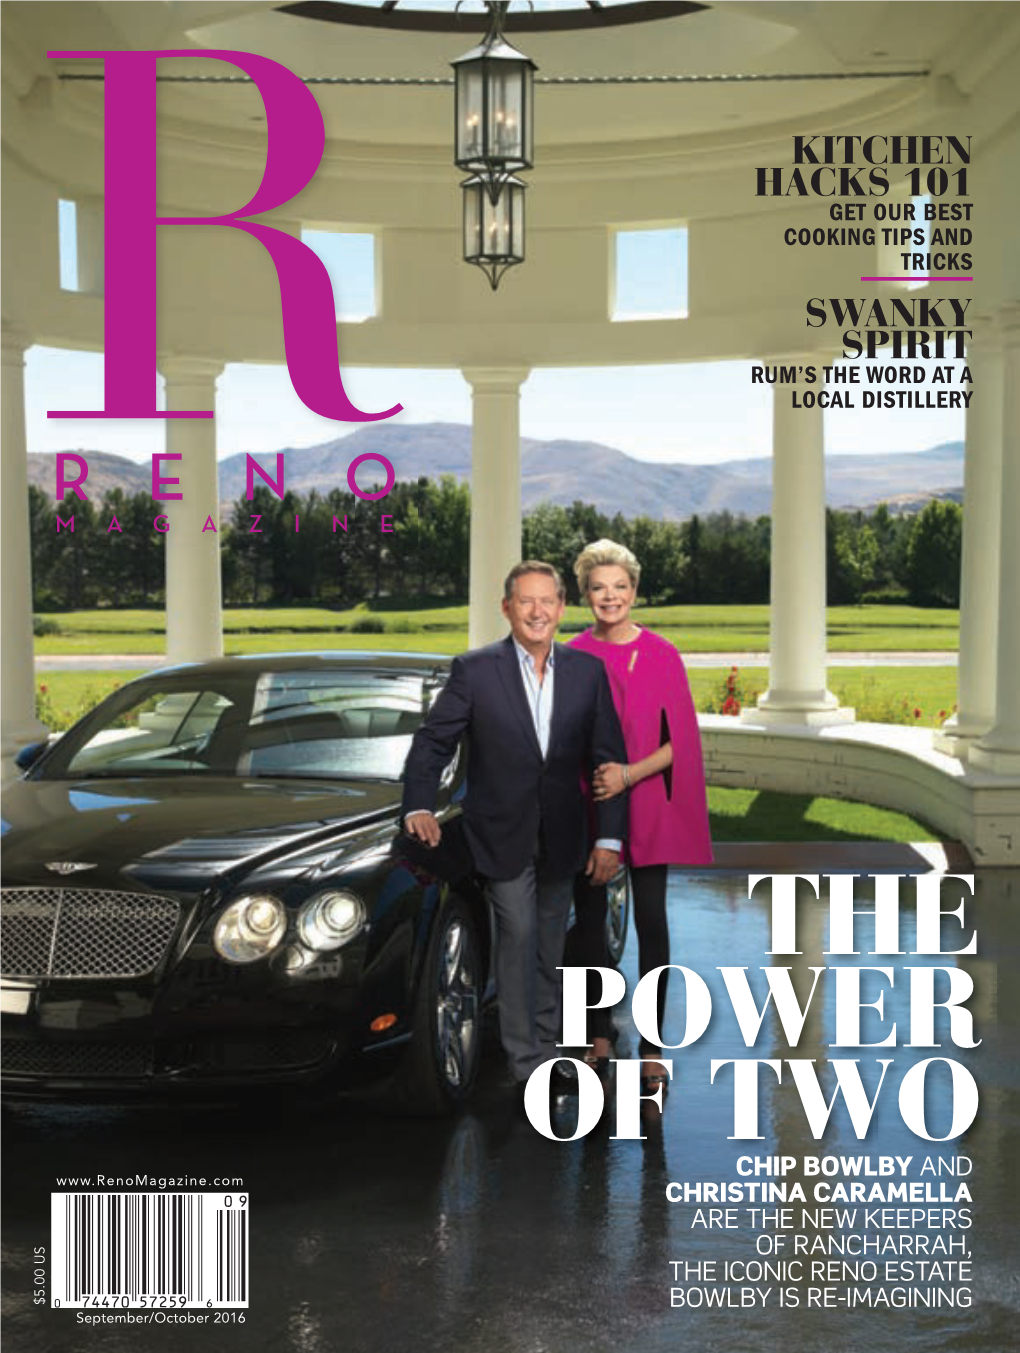 The Power of Two Chip Bowlby and Christina Caramella Are the New Keepers of Rancharrah, the Iconic Reno Estate